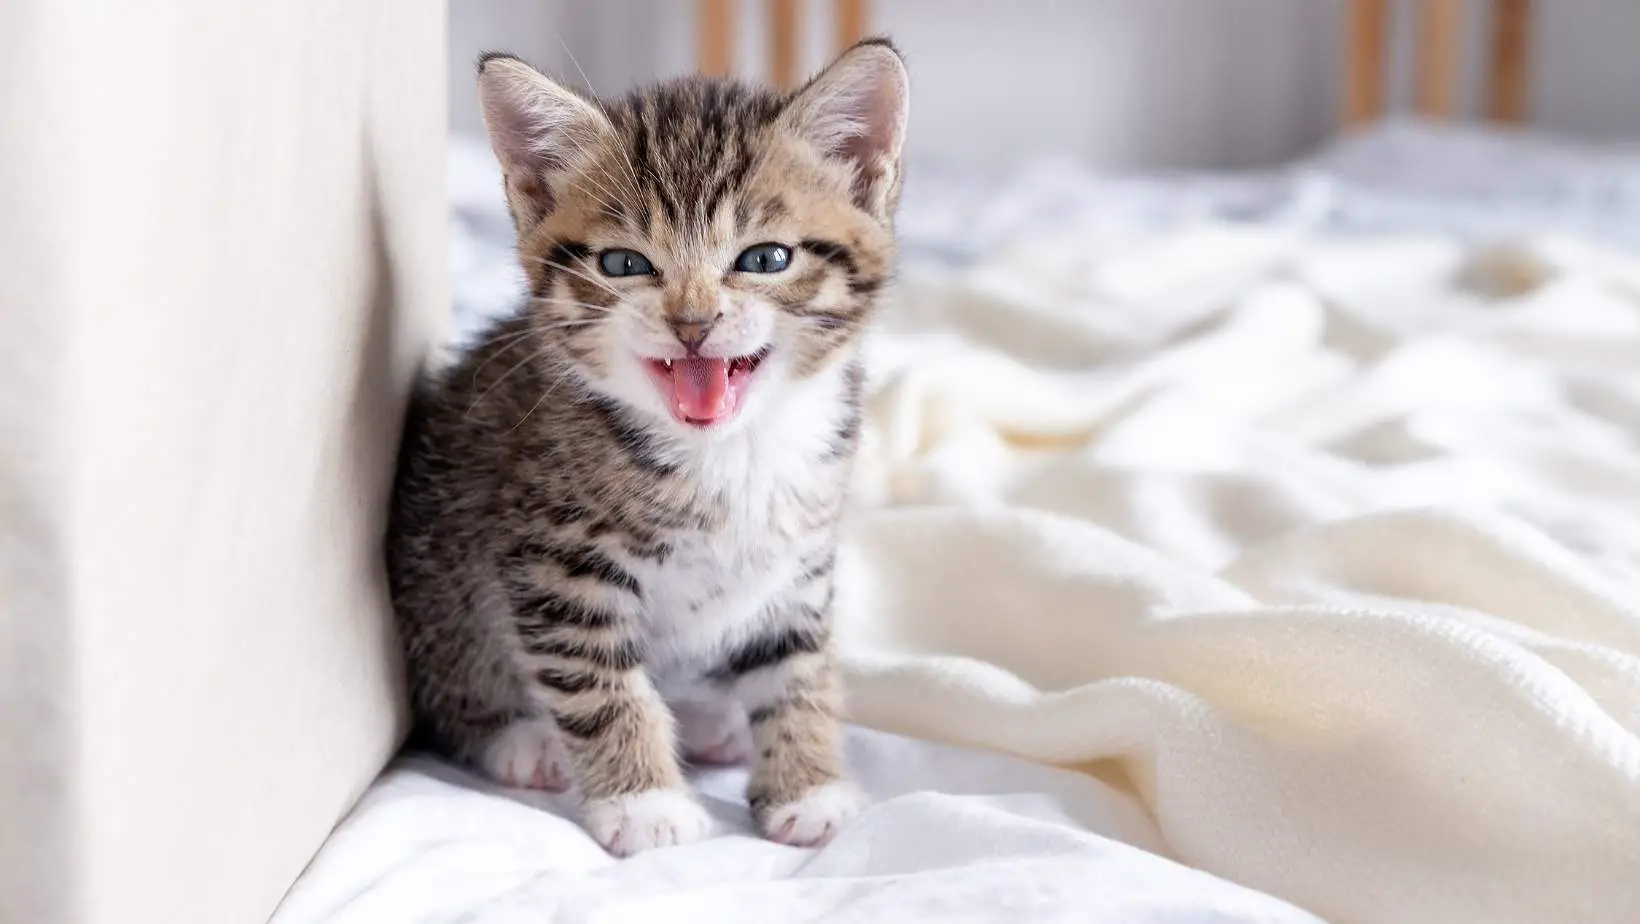 What Does It Mean When a Cat Hisses?